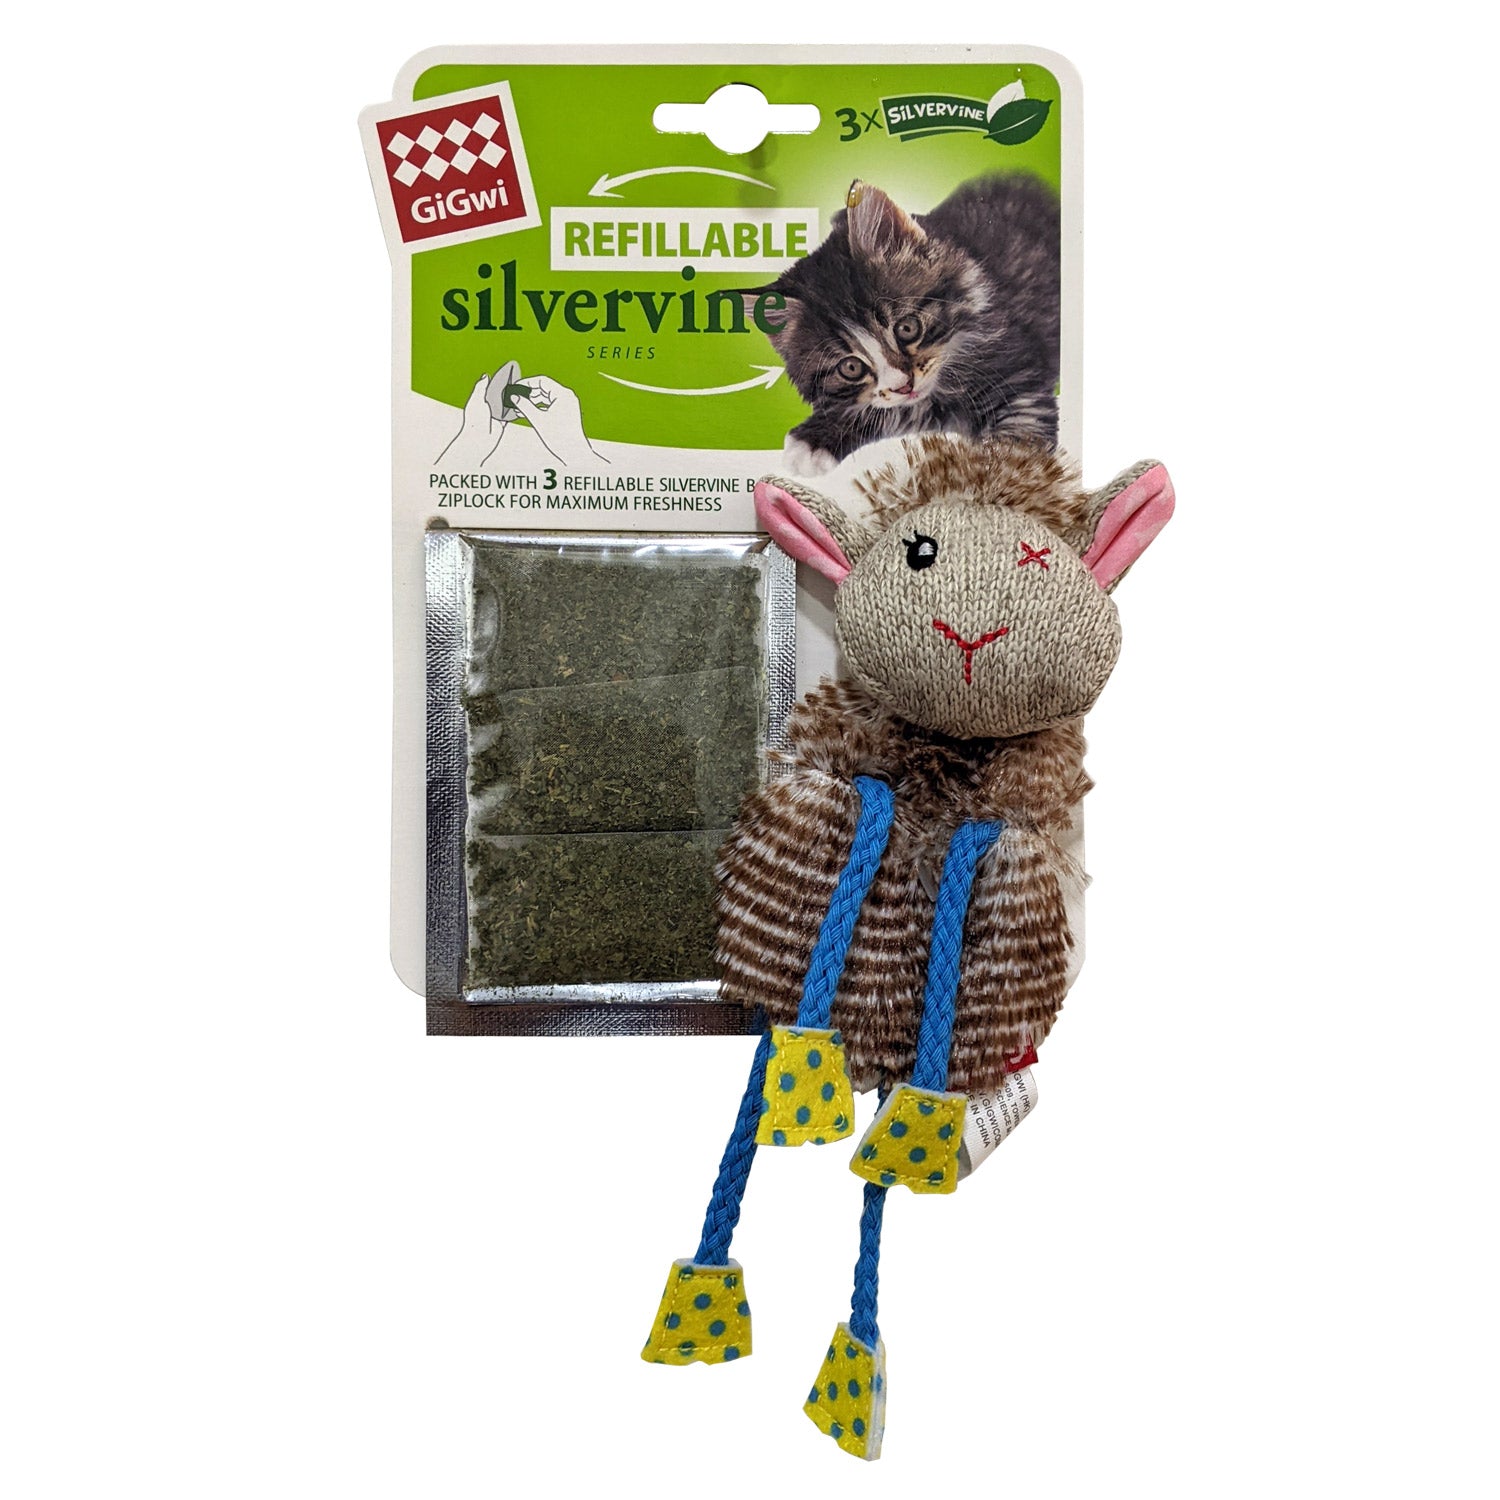 GIGWI Refillable Silvervine Toys with 3 Silvervine Bags (Sheep)